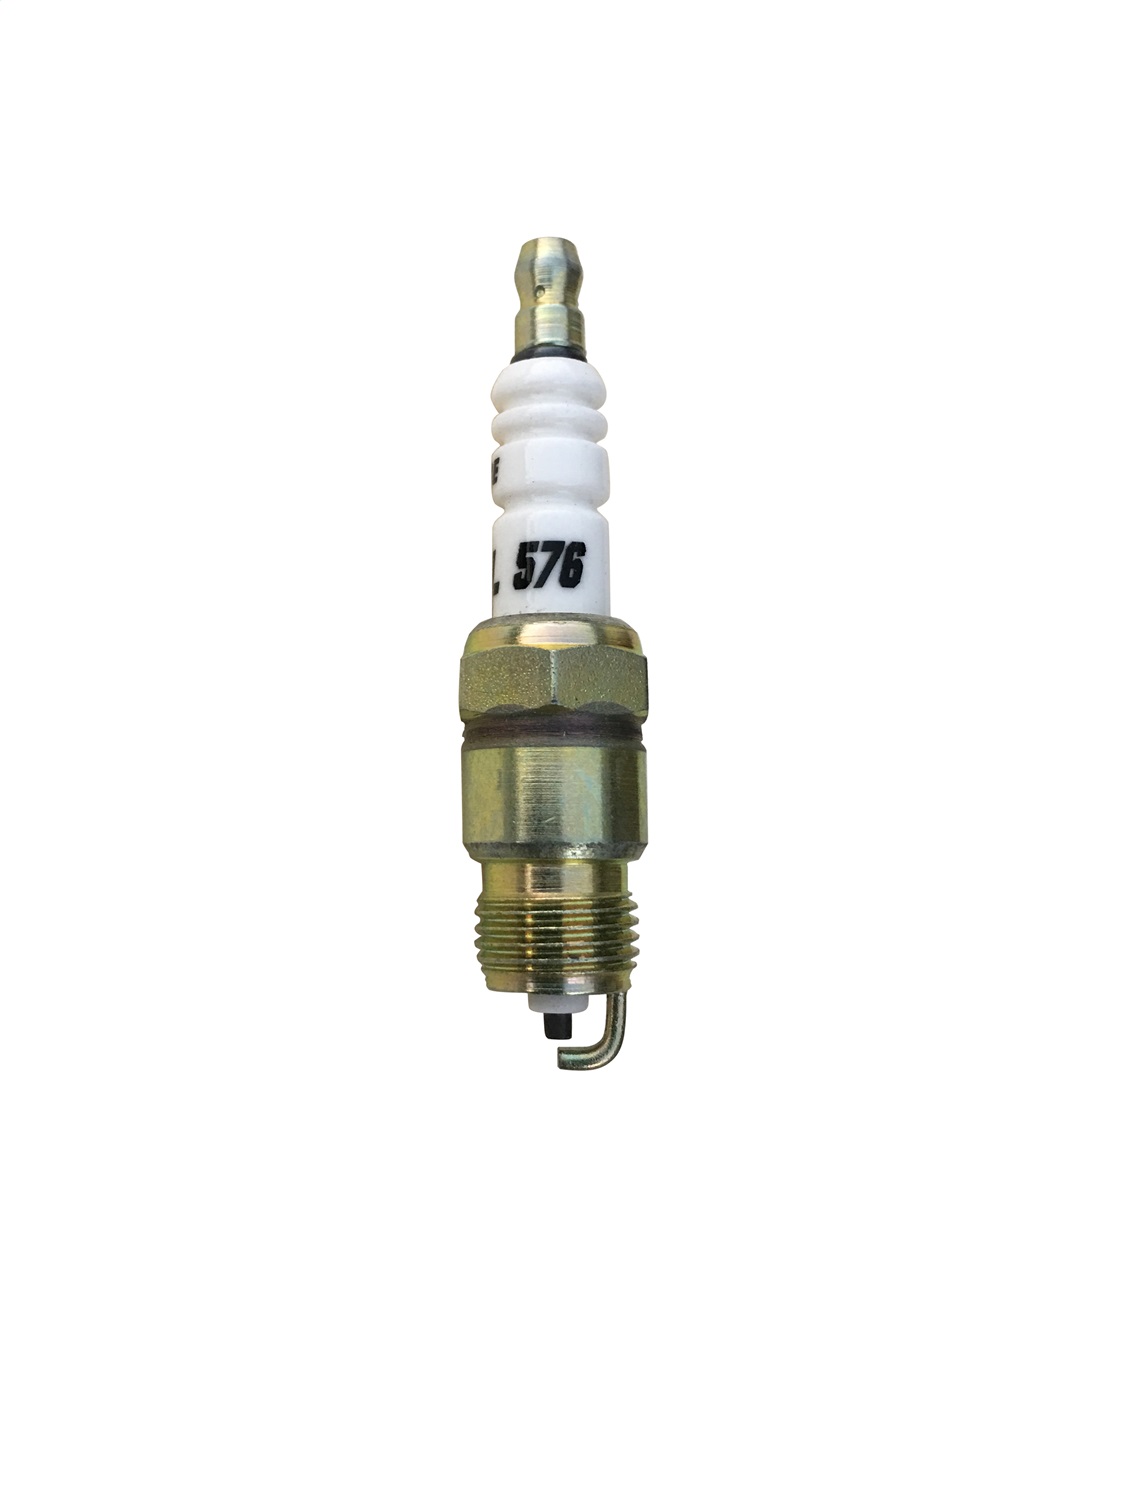 Accel 0576 Spark Plug For BUICK,CADILLAC,CHEVROLET,FORD,GMC,JEEP,LINCOLN,MERCURY,OLDSMOBILE,PLYMOUTH,PONTIAC